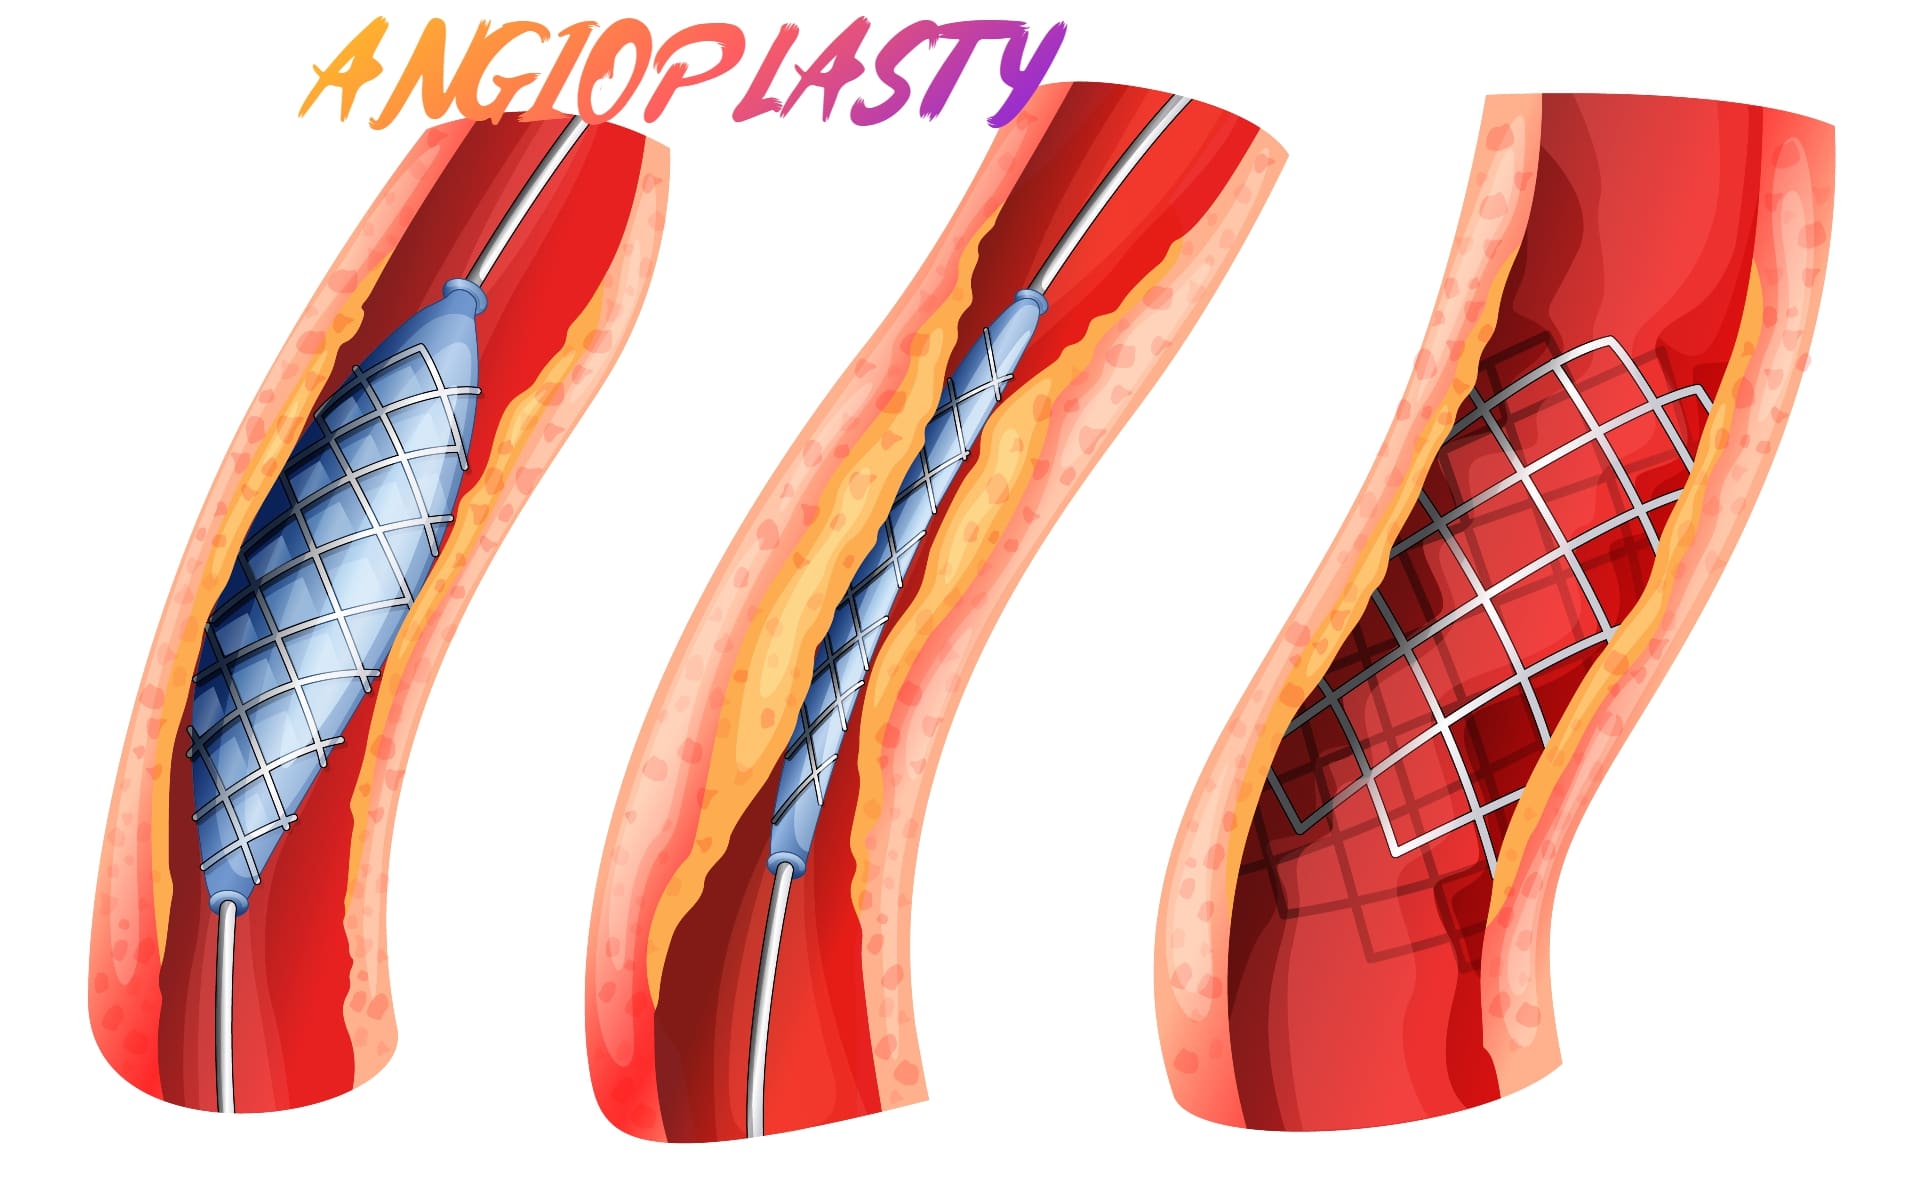 Angioplasty to coronary artery with DES or drug eluting stent in a blocked coronary artery